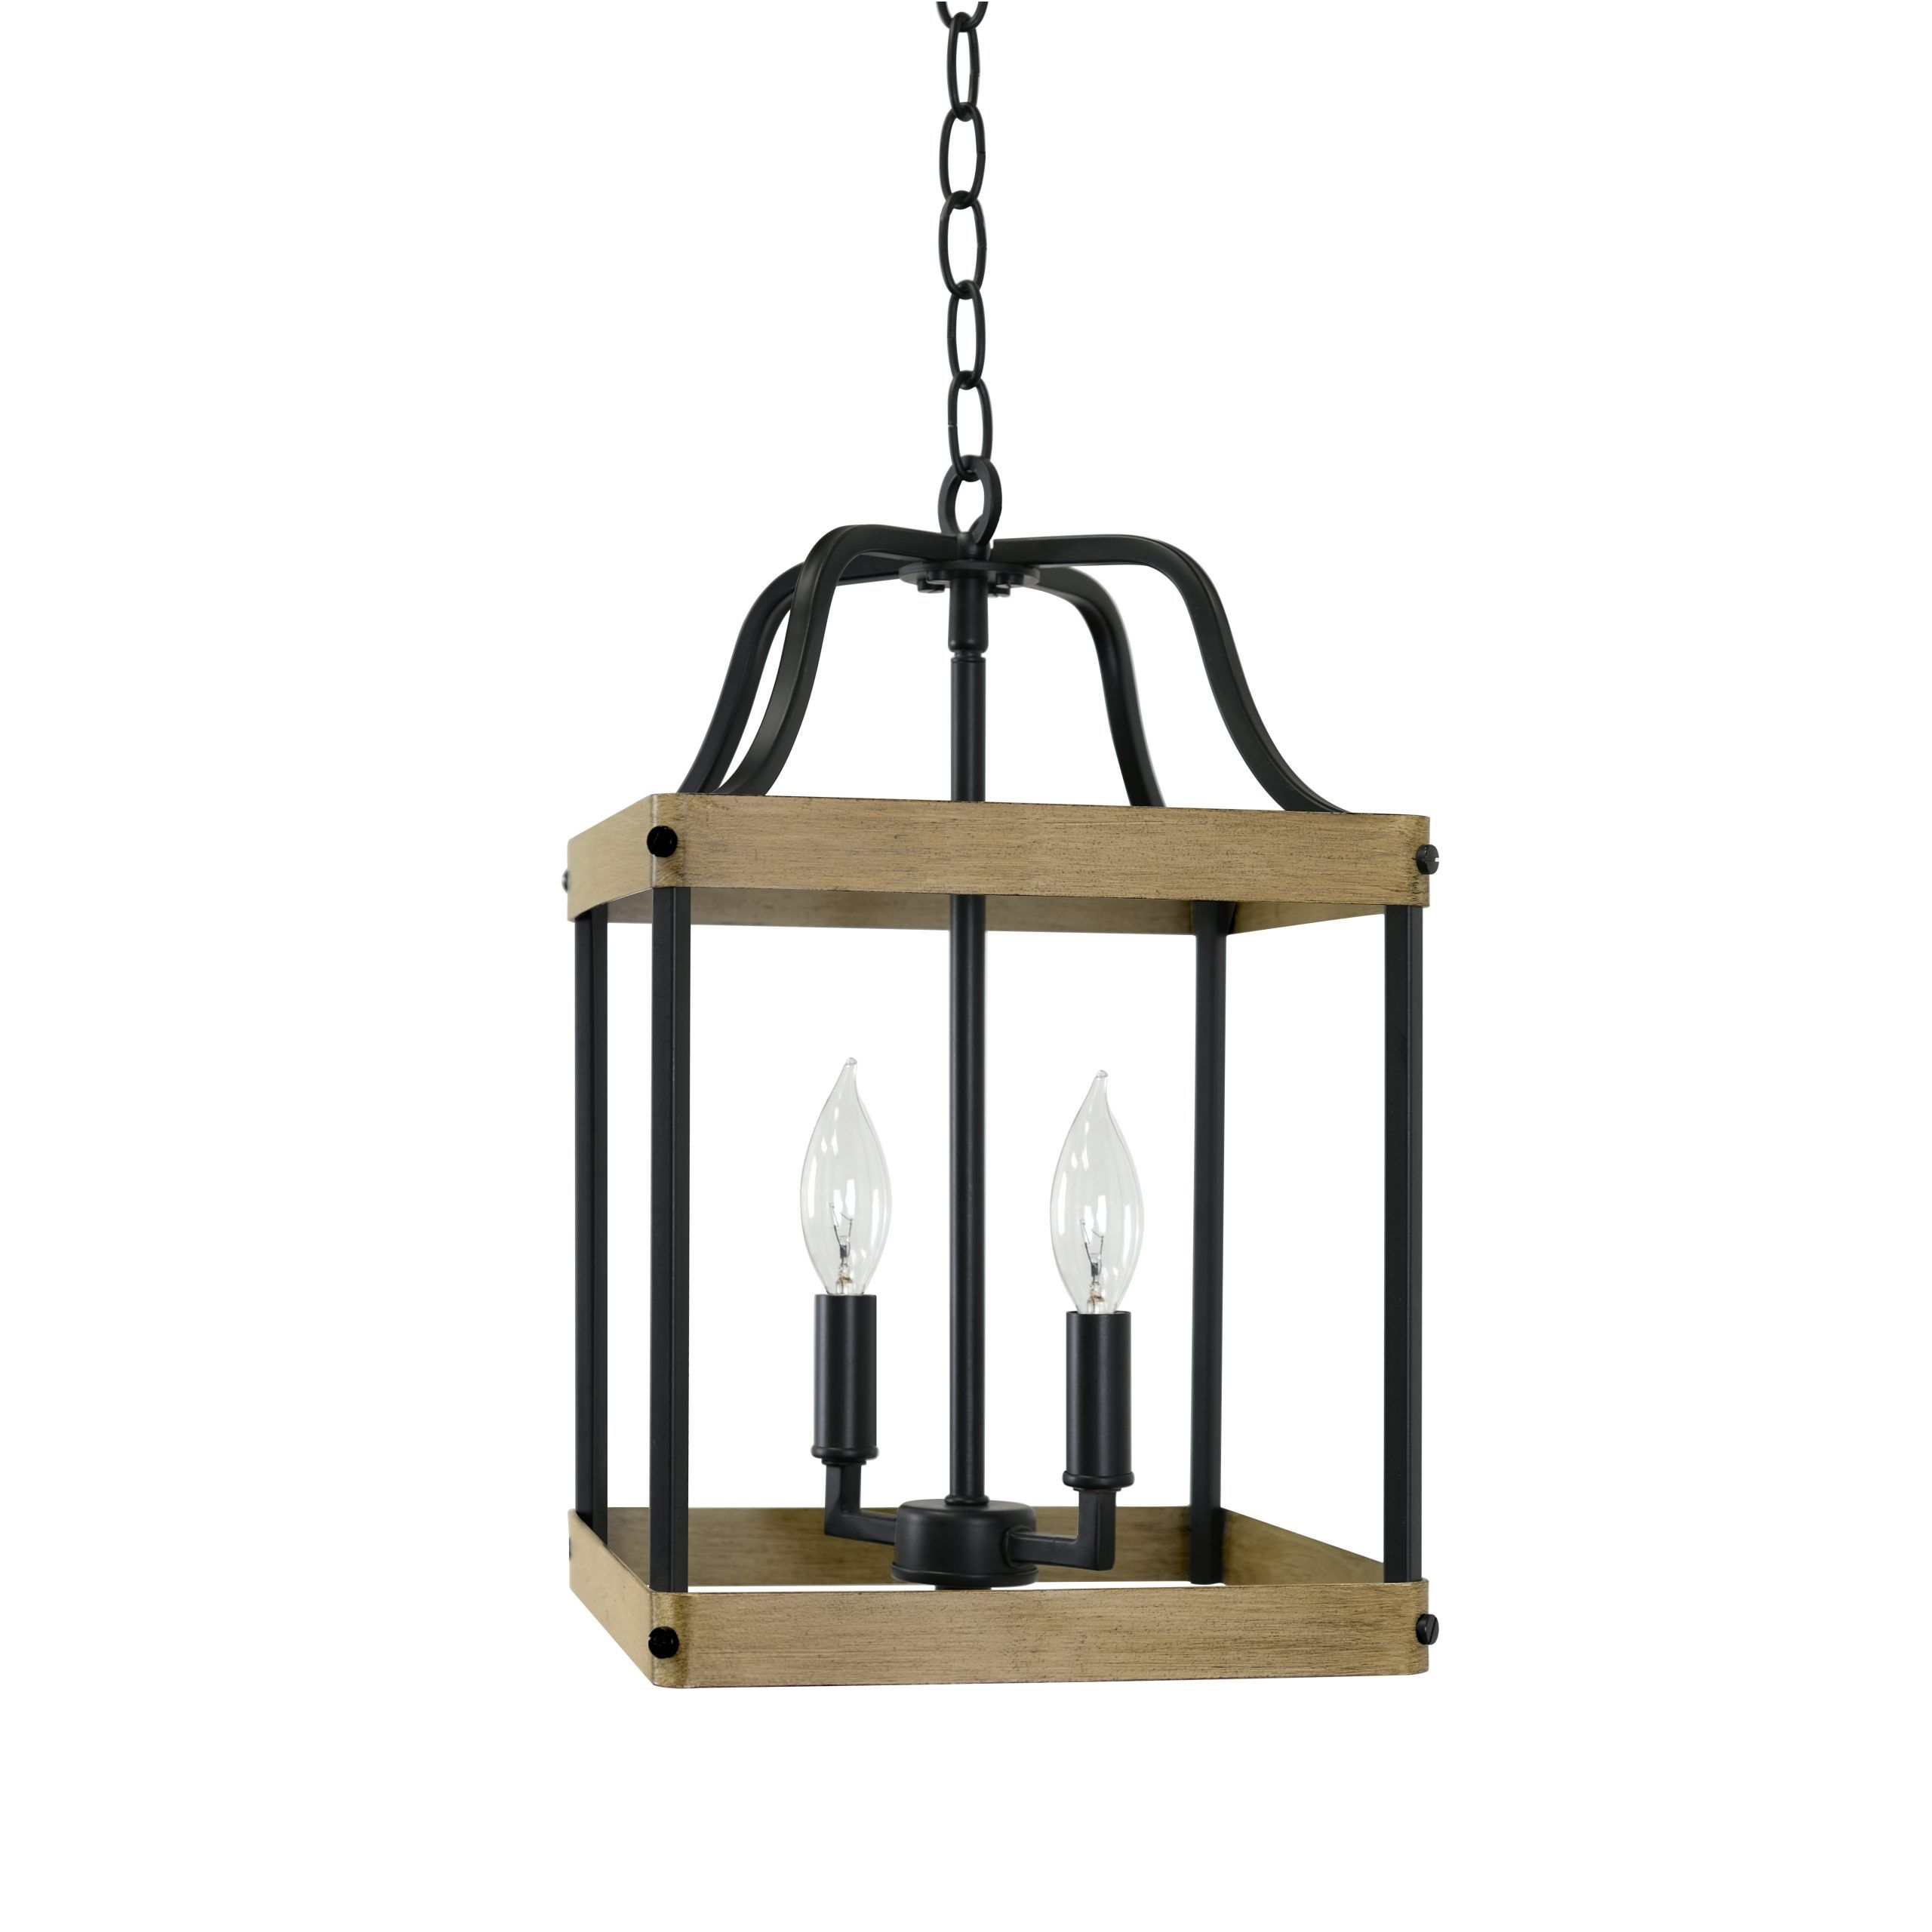 Wayfair Within Two Light Lantern Chandeliers (View 4 of 15)